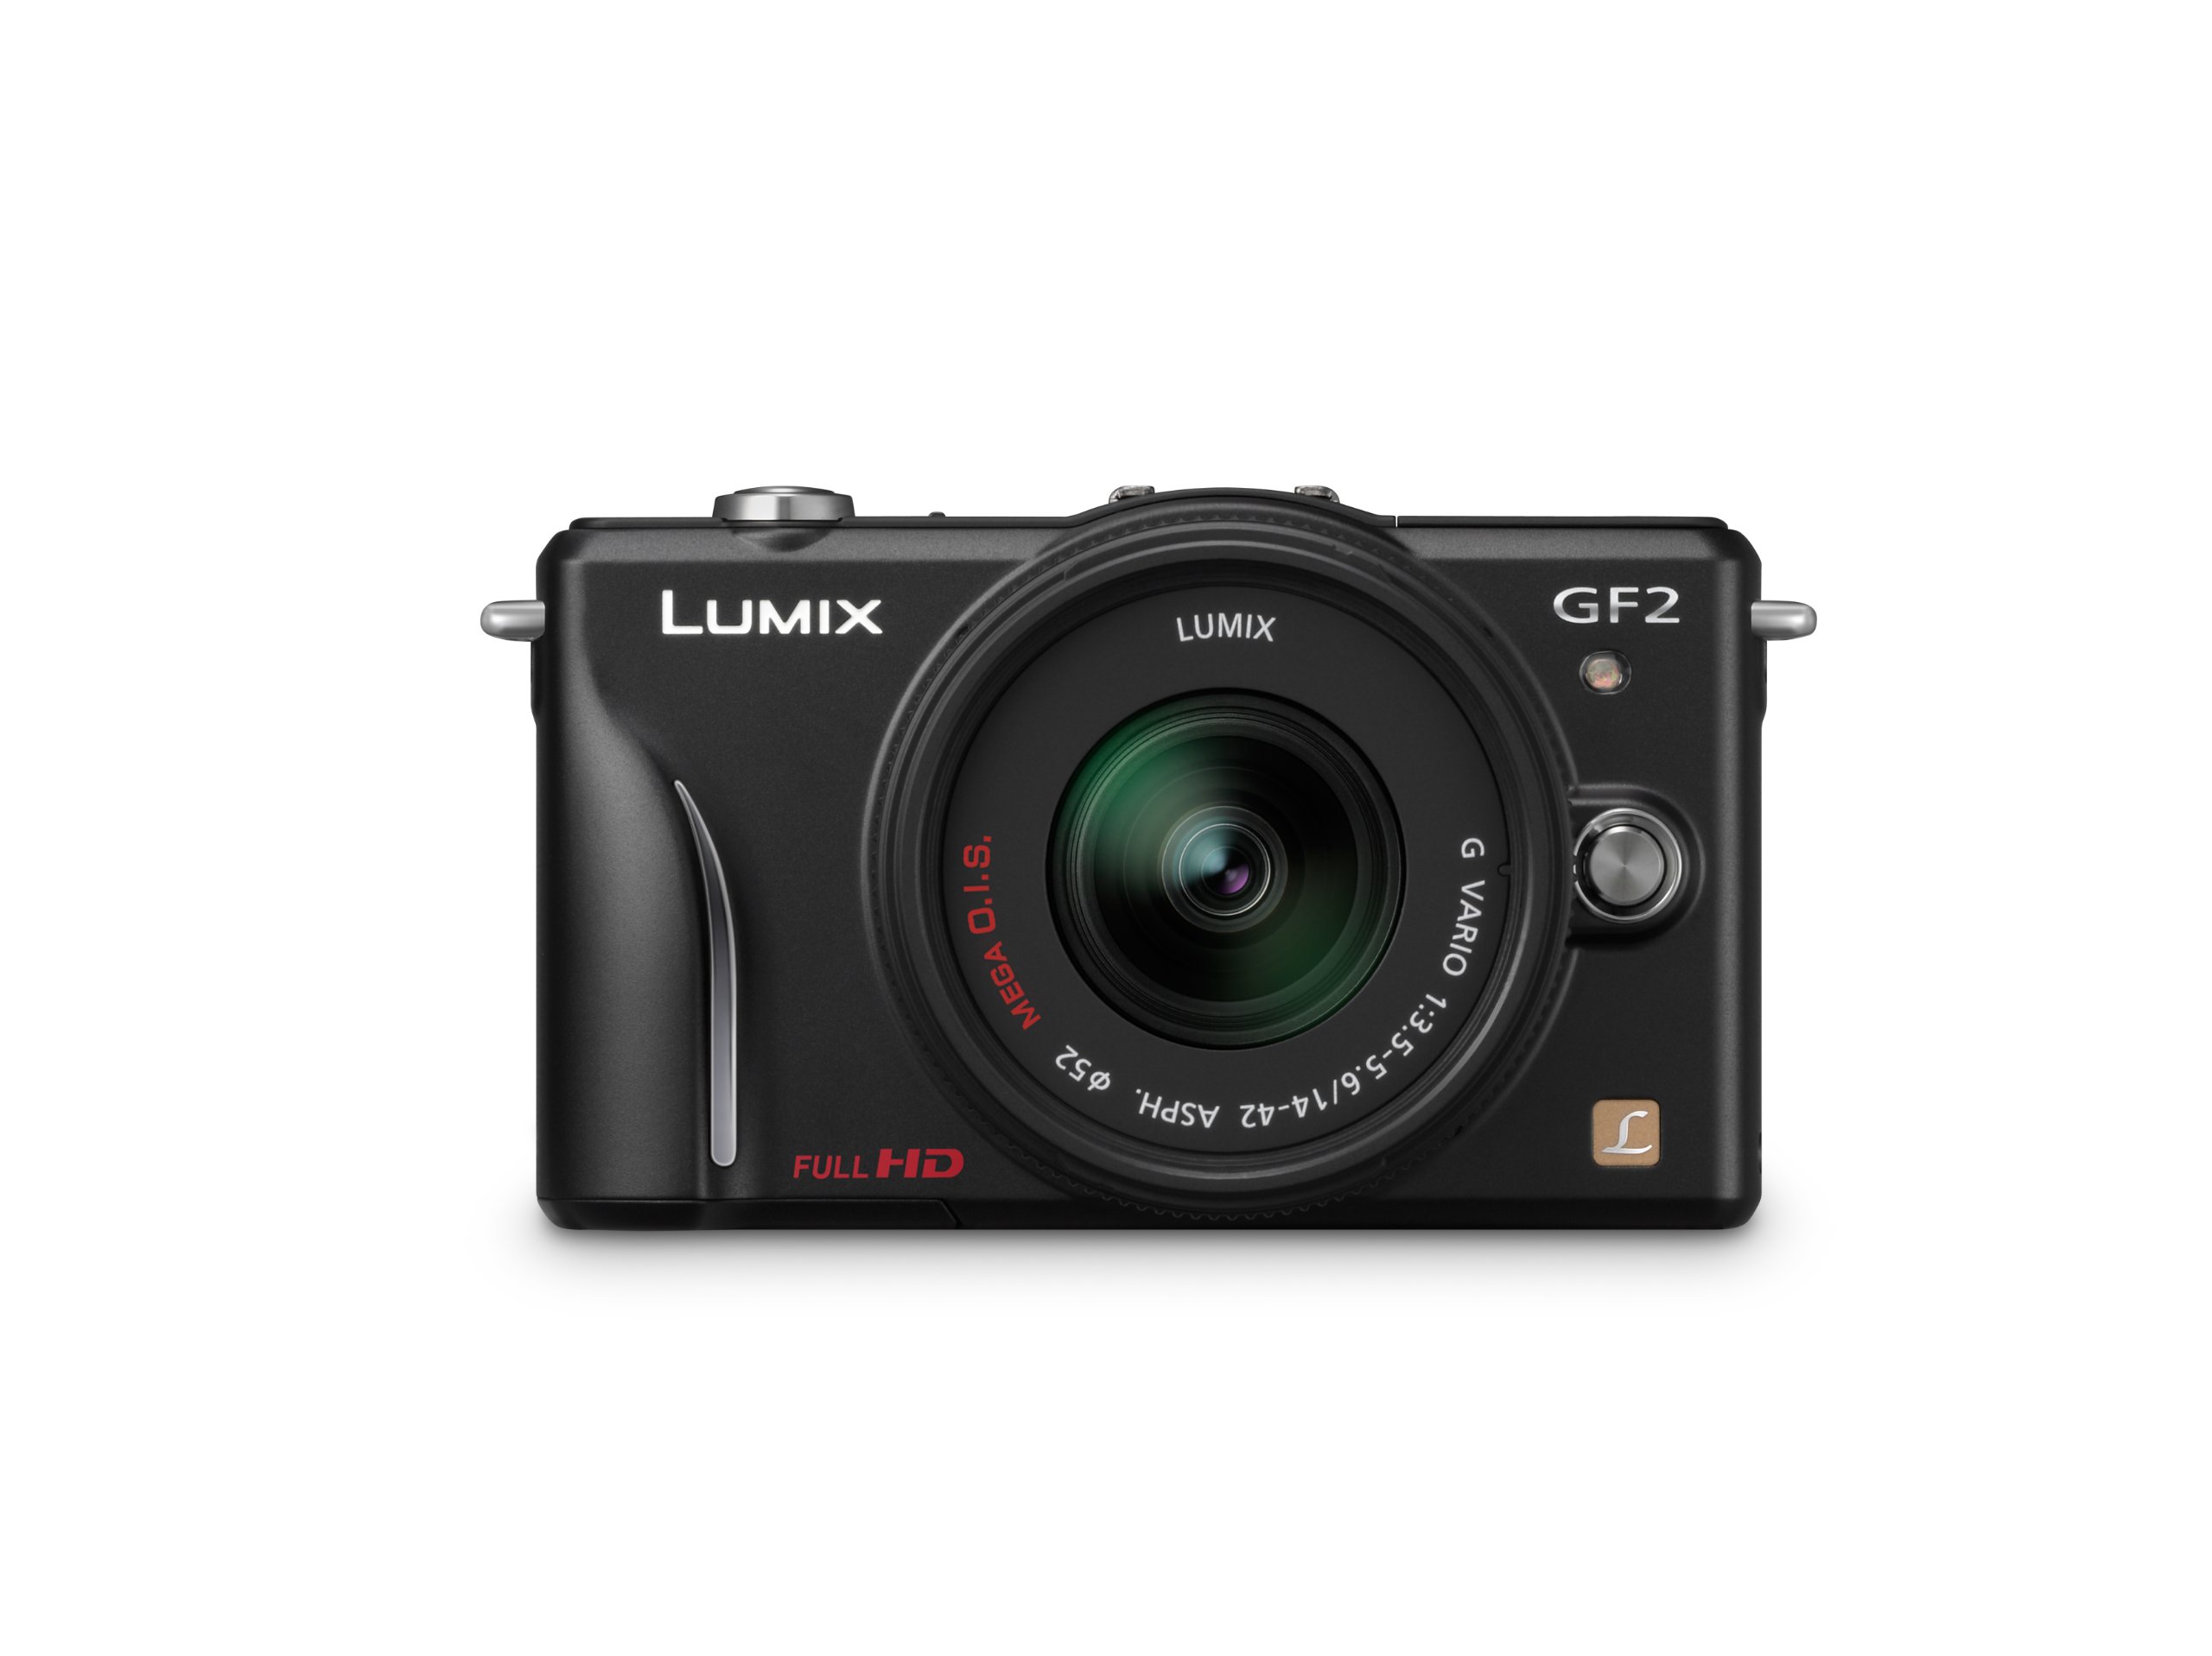 Panasonic Lumix DMC-GF2 12 MP Micro Four-Thirds Mirrorless Digital Camera with 3.0-Inch Touch-Screen LCD and 14-42mm Lens (Black)